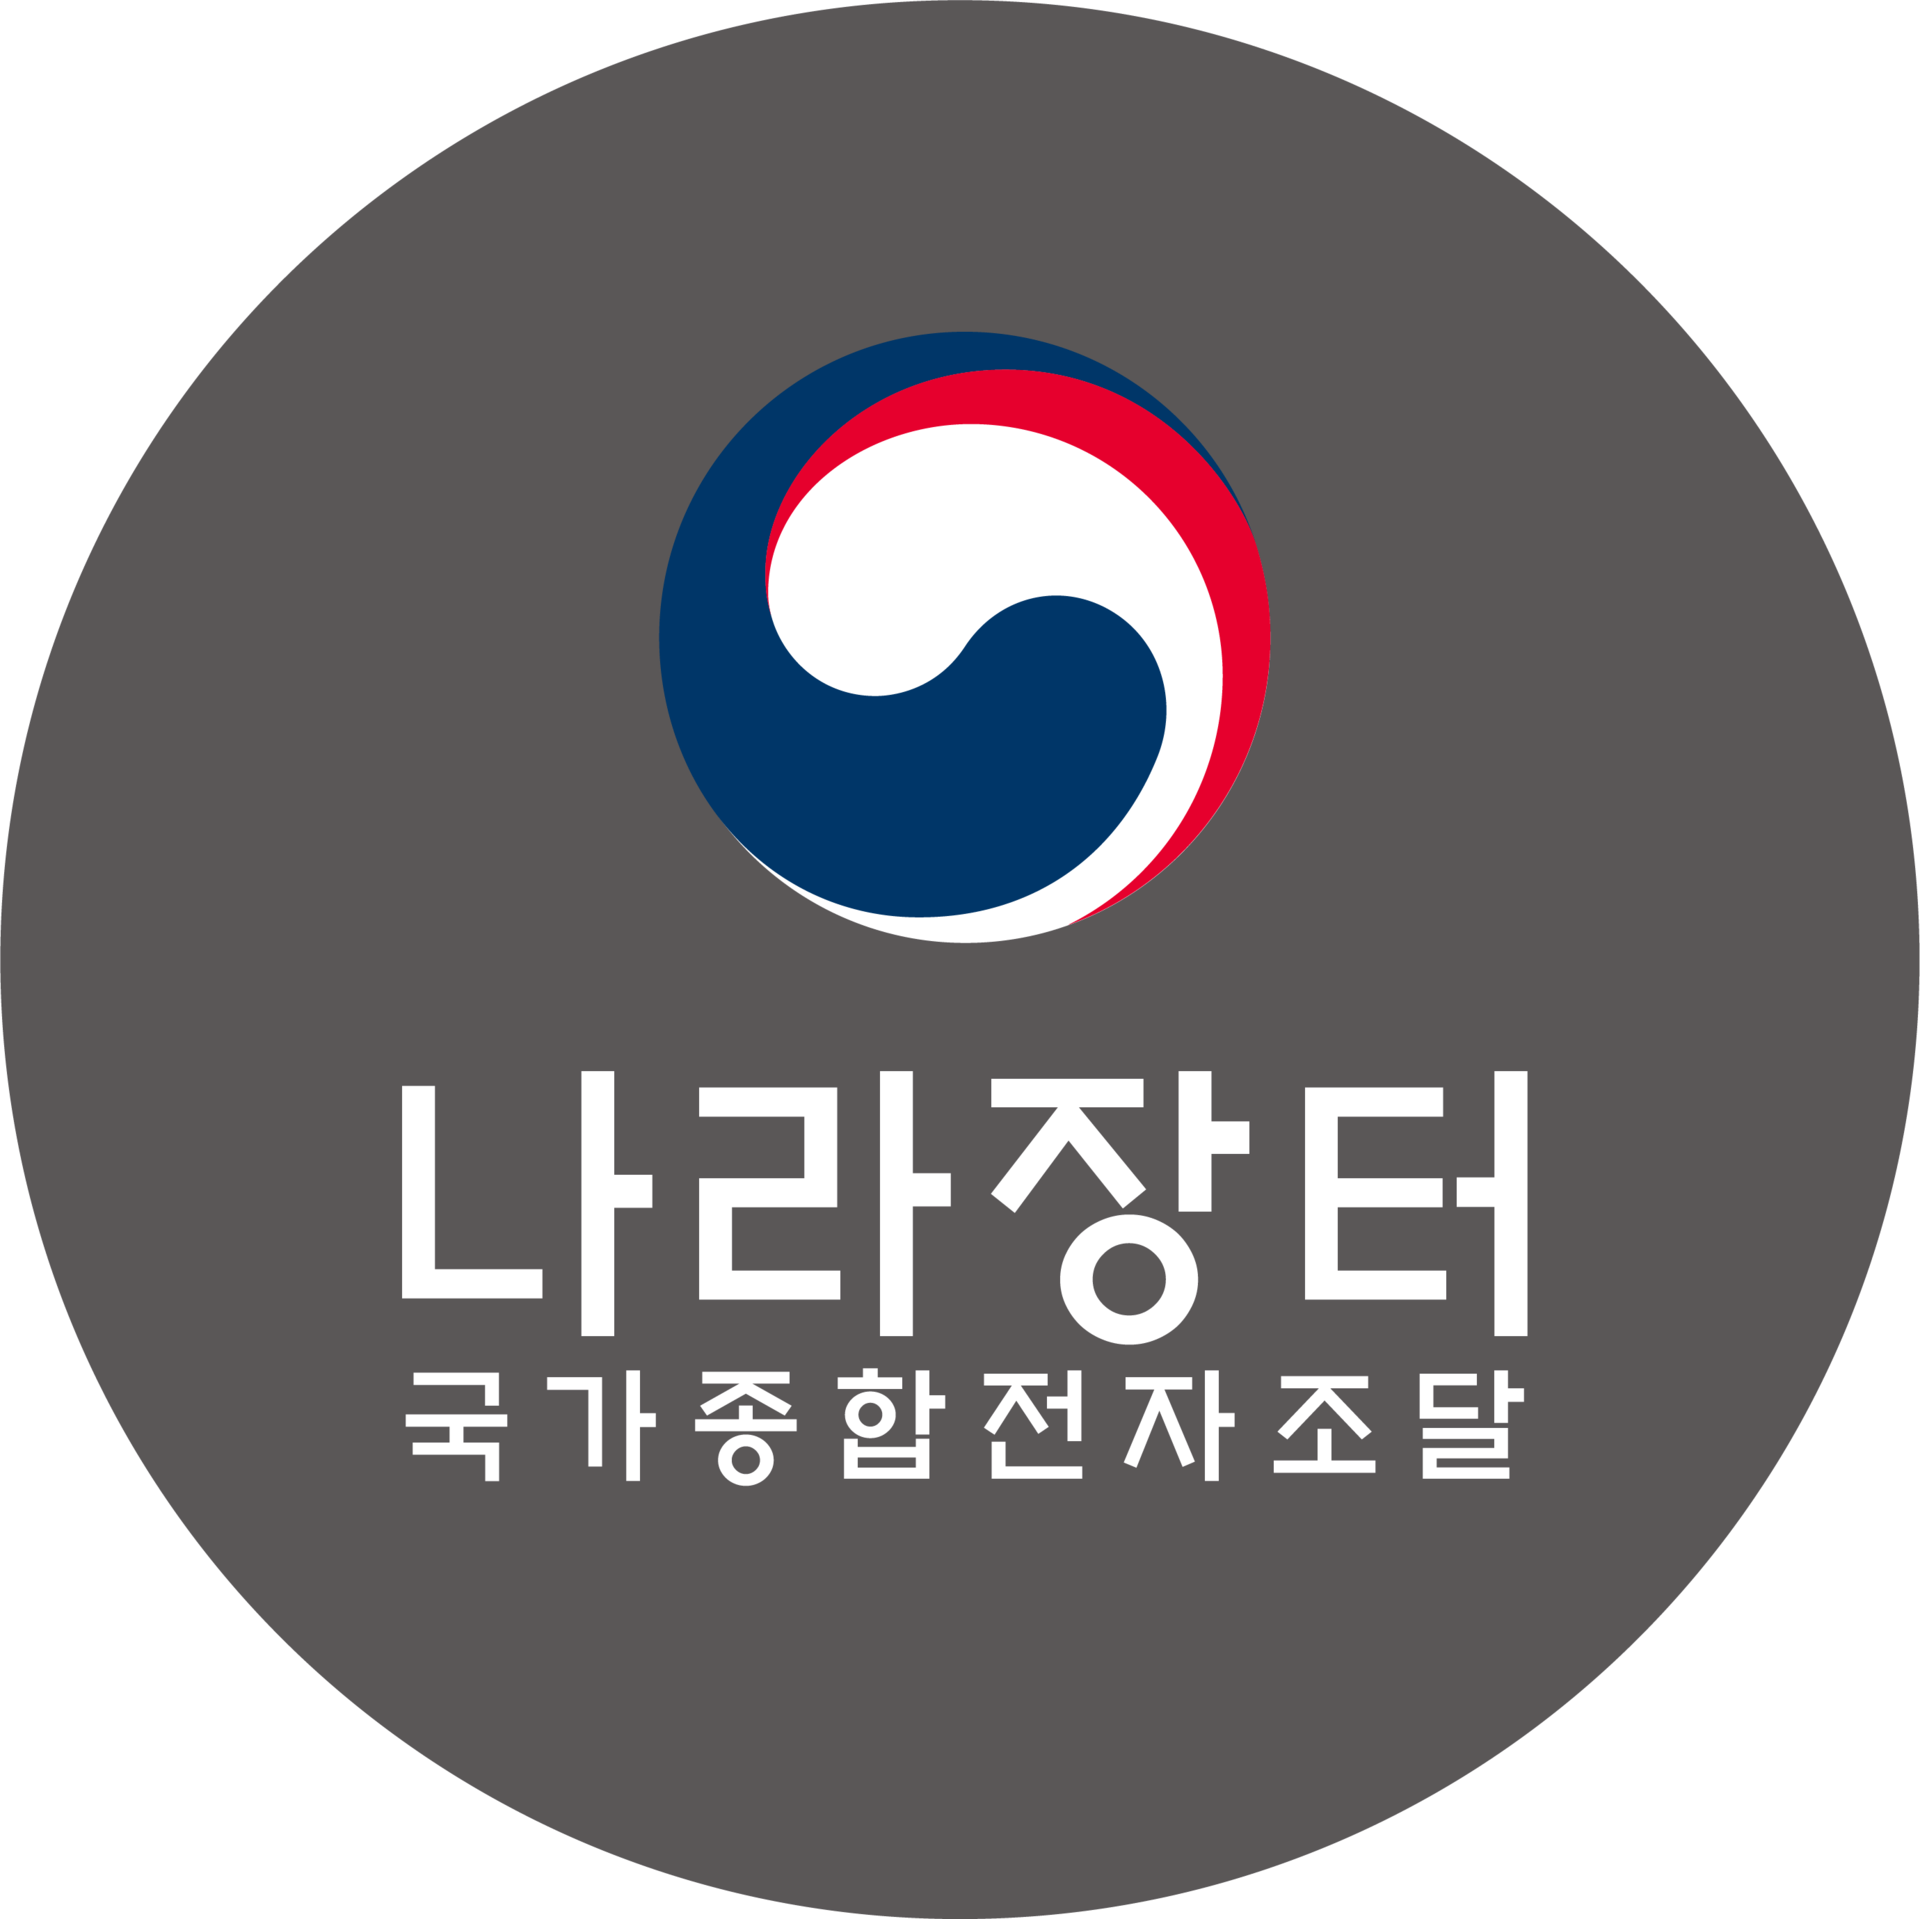 <p style="text-align: center;"><span style="font-size: 14px;"><strong><span style="color: rgb(255, 255, 255);">다수공급자물품</span></strong></span></p>